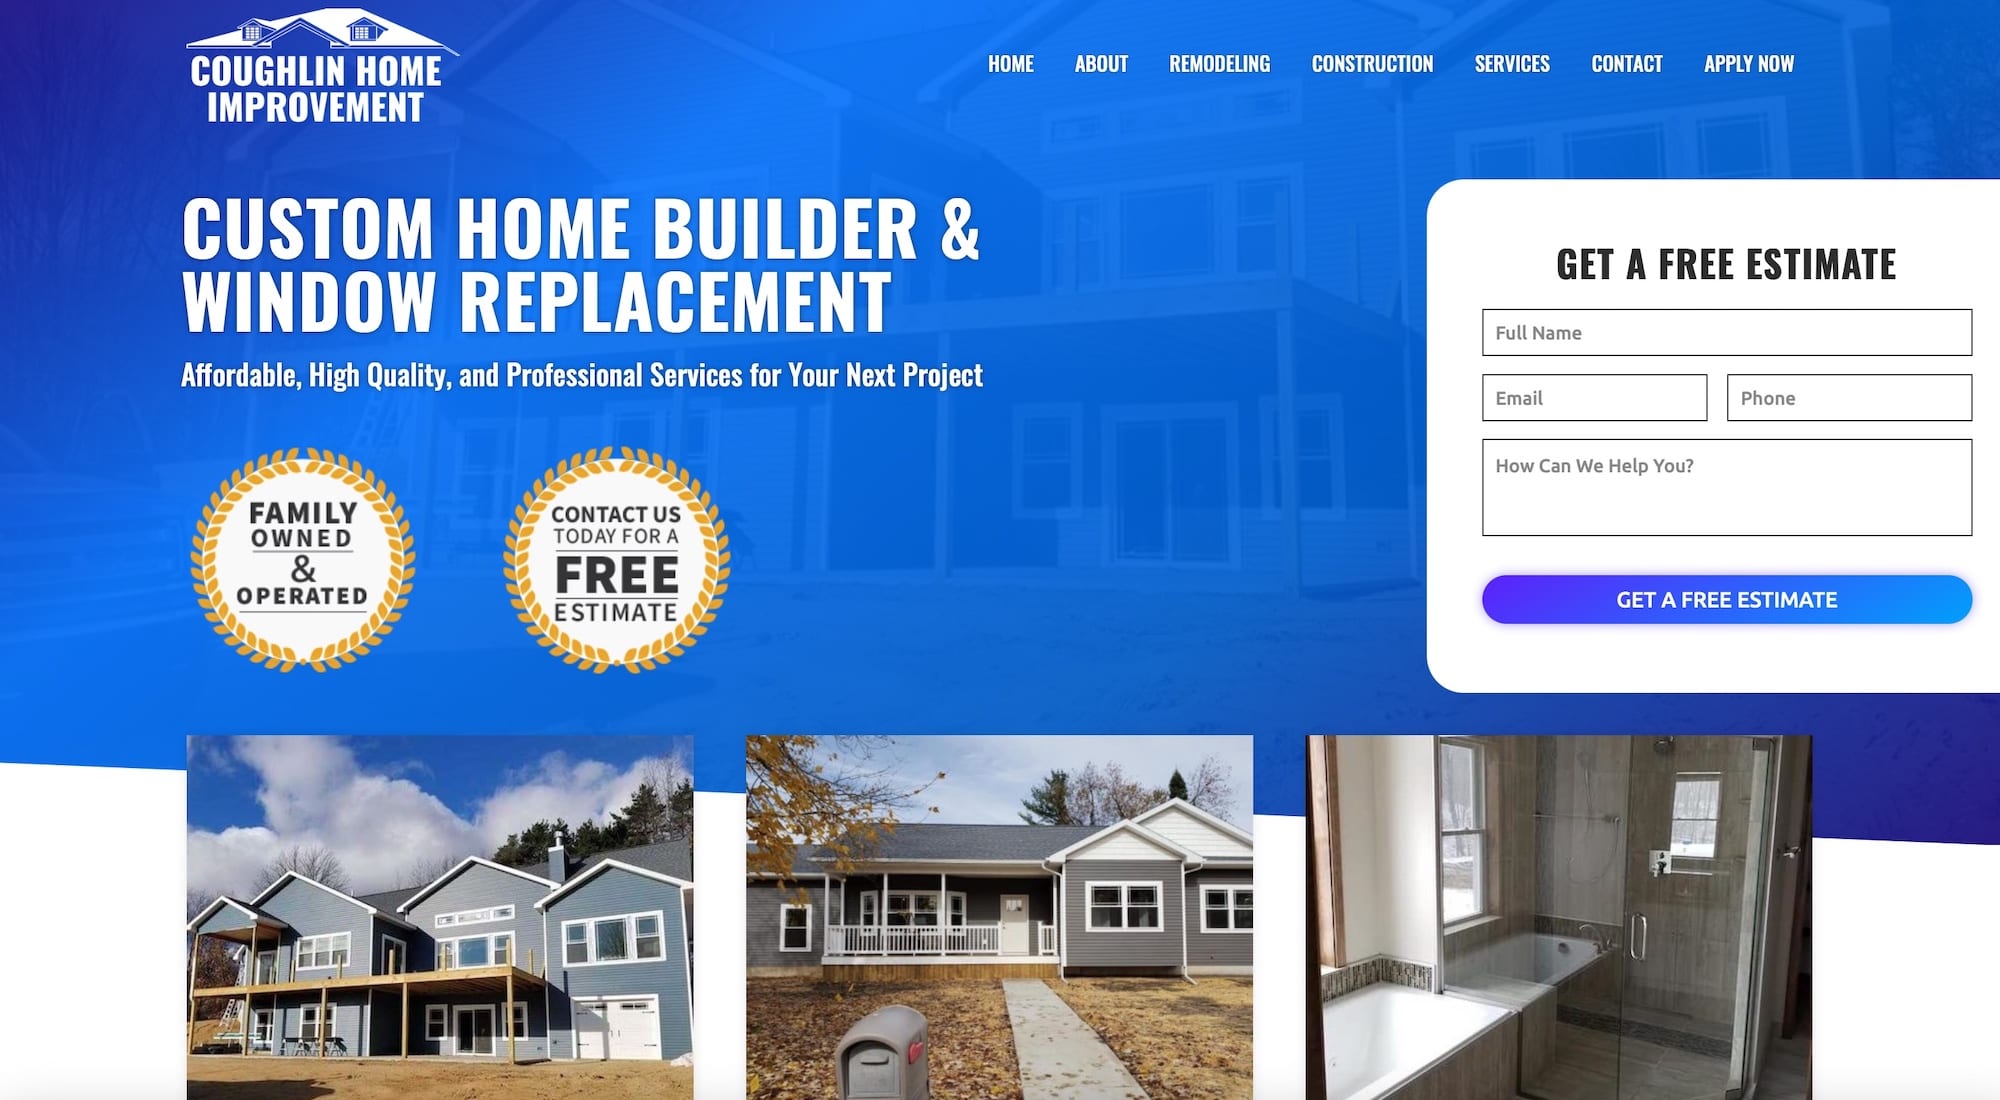 Coughlin Home Improvement Featured